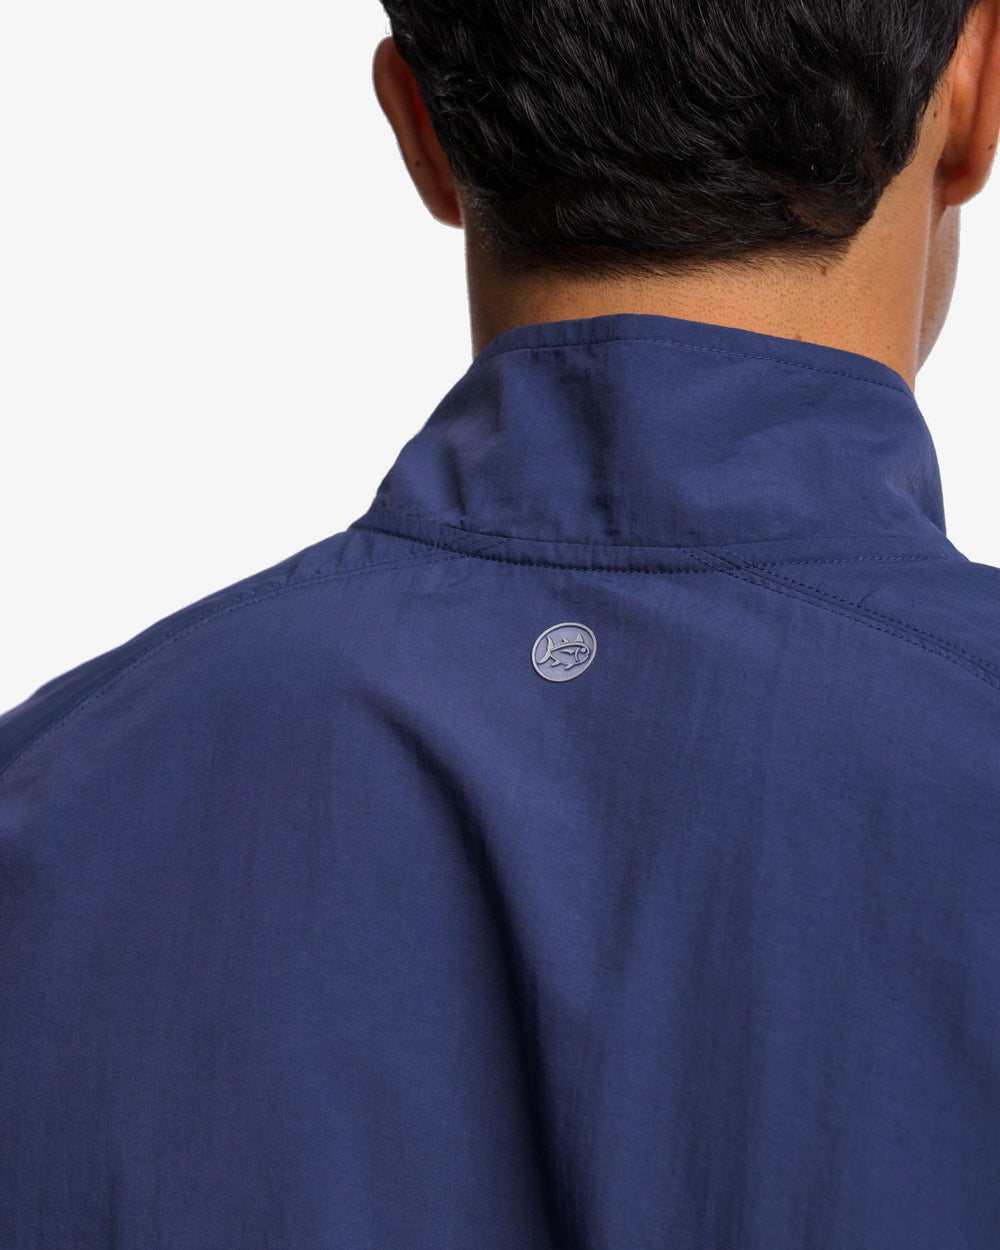 The yoke view of the Southern Tide Shoreline Performance Pullover by Southern Tide - True Navy